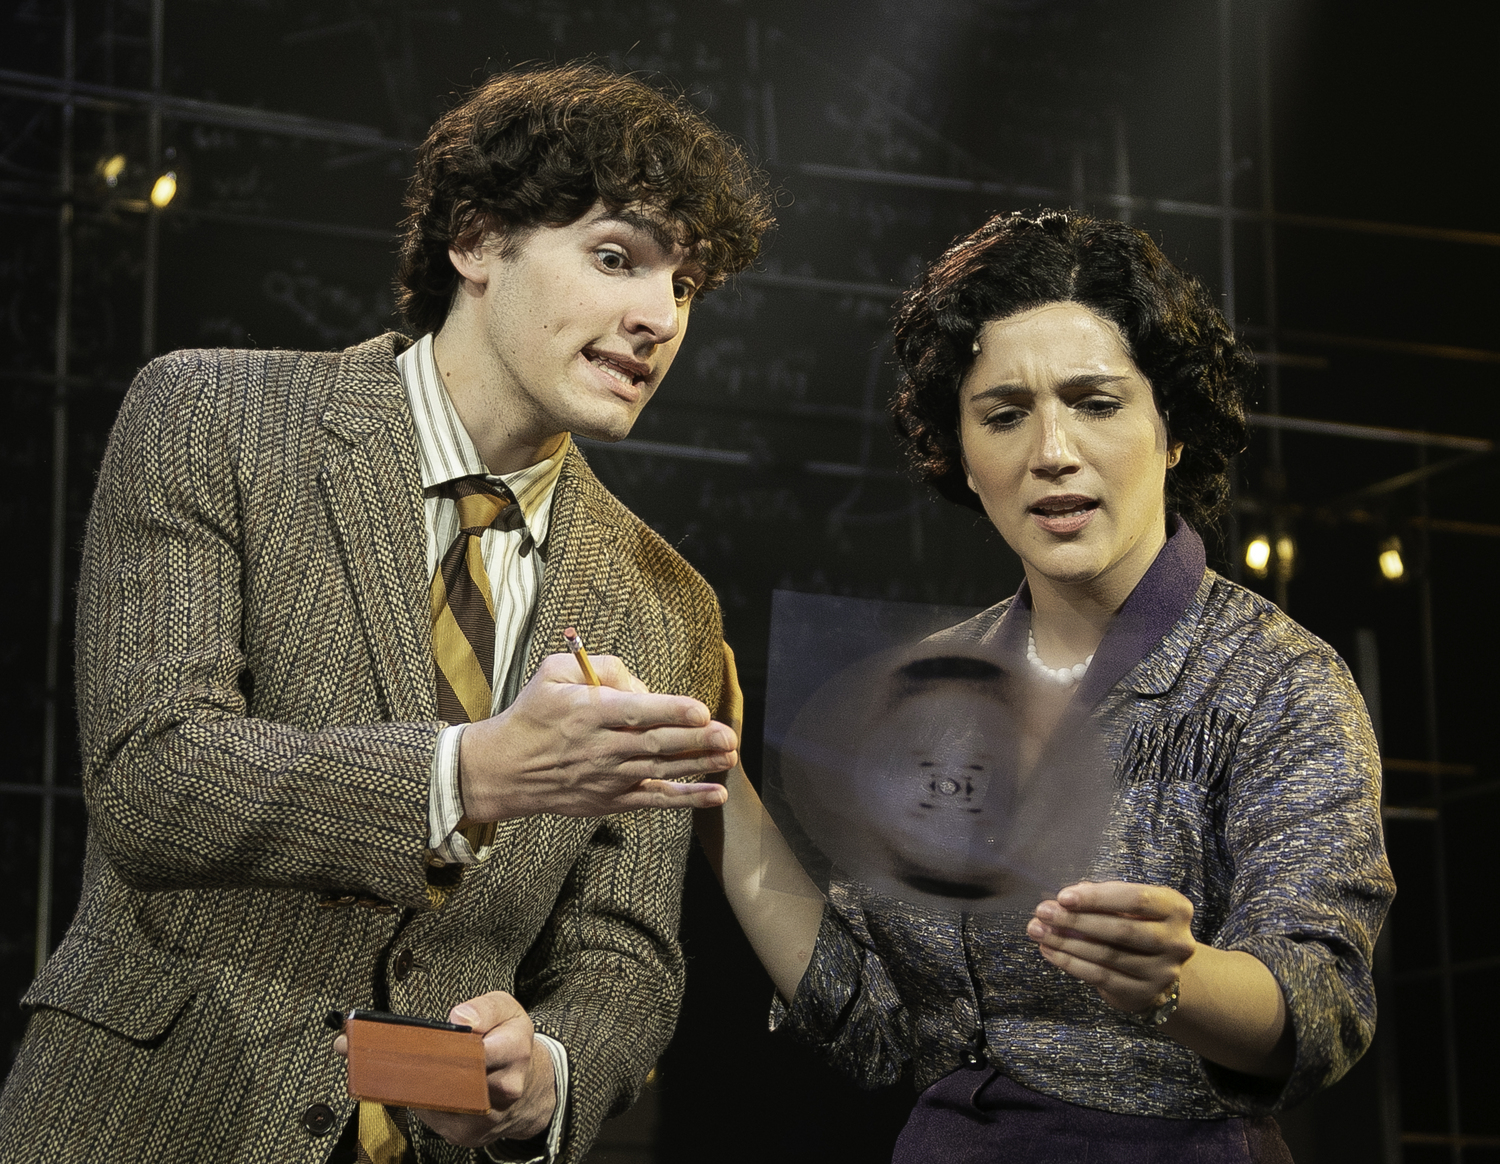 Anthony Joseph Costello as Raymond Gosling and Samantha Massell as Rosalind Franklin in 